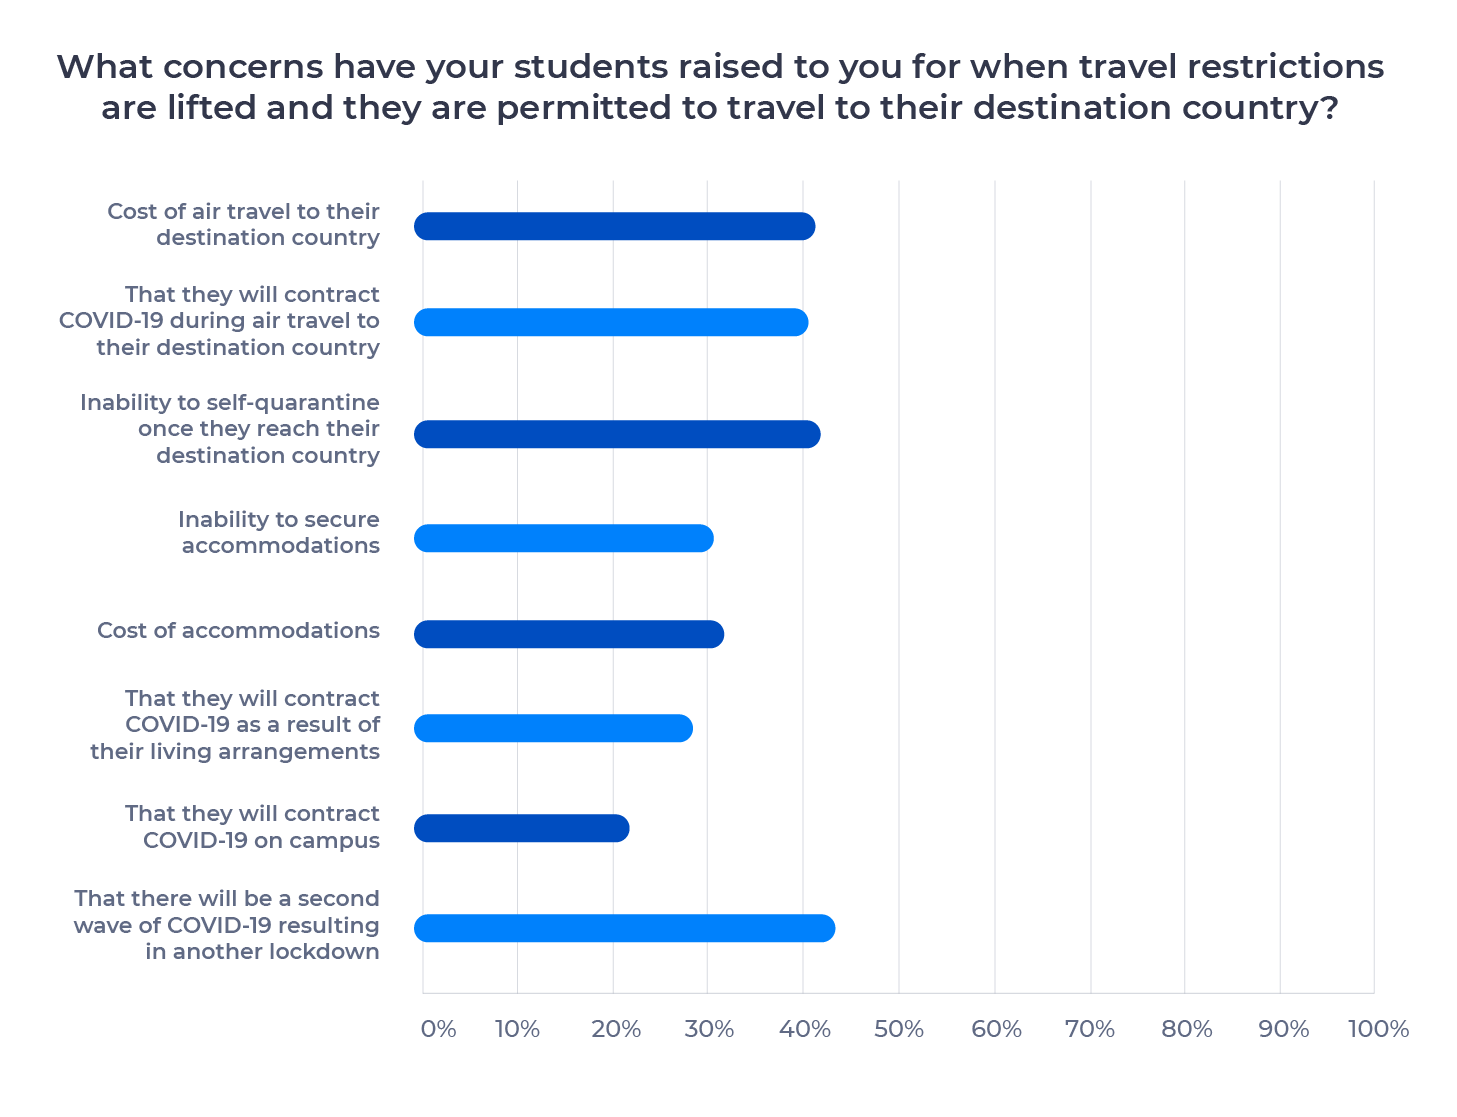 Bar chart showing concerns international students have for when travel restrictions are lifted. Described in detail below.